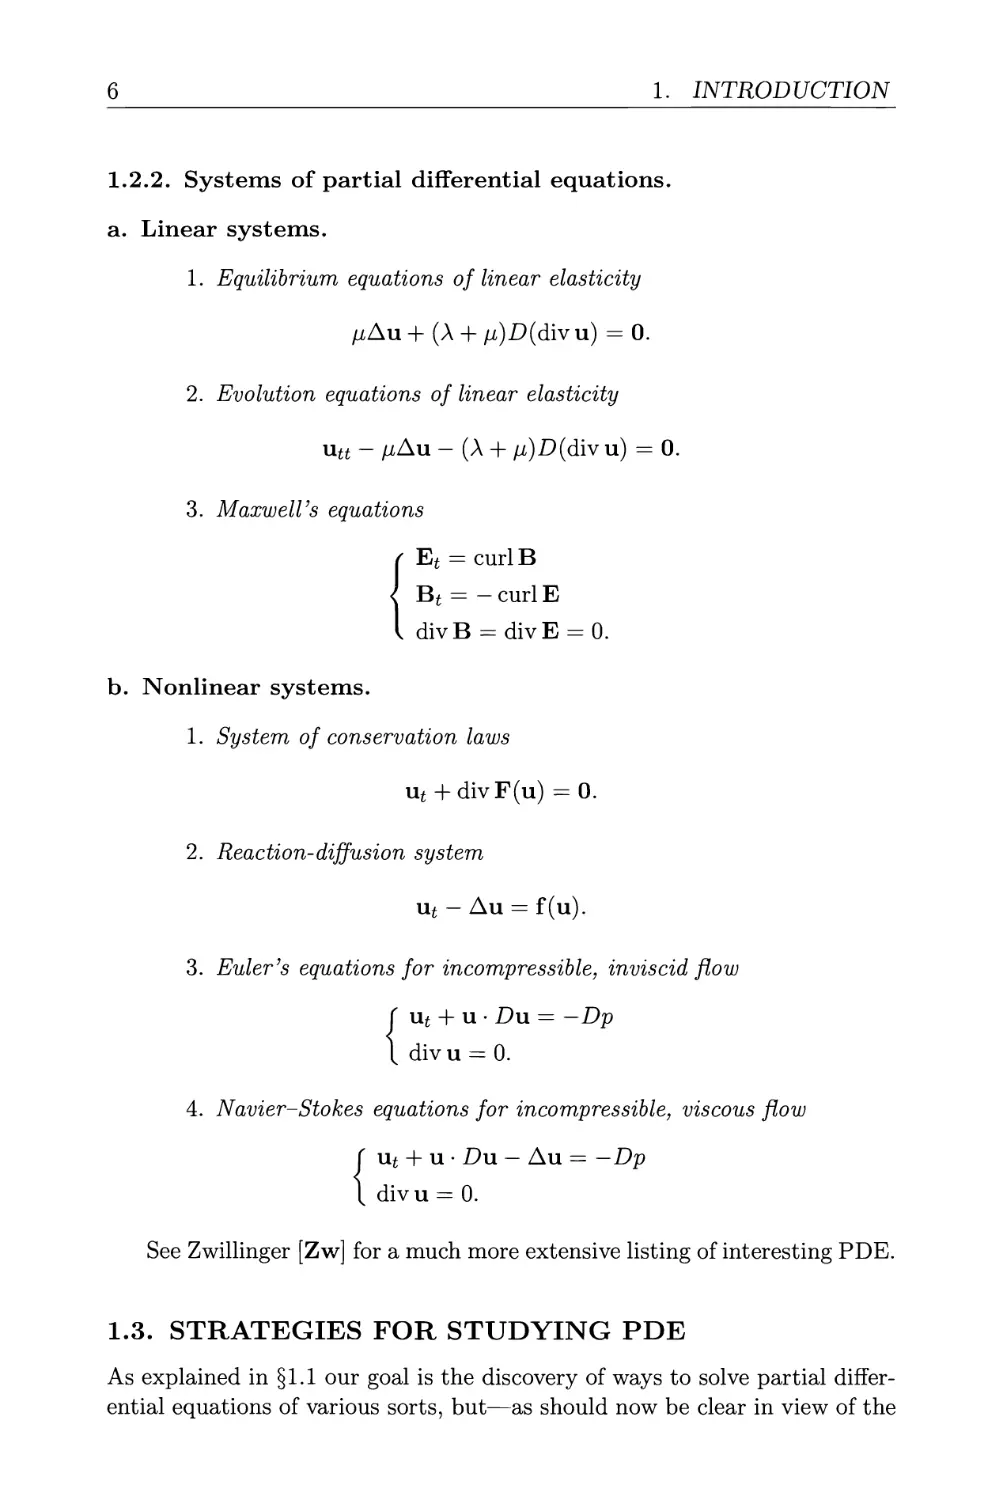 1.2.2. Systems of partial differential equations
1.3. Strategies for studying PDE